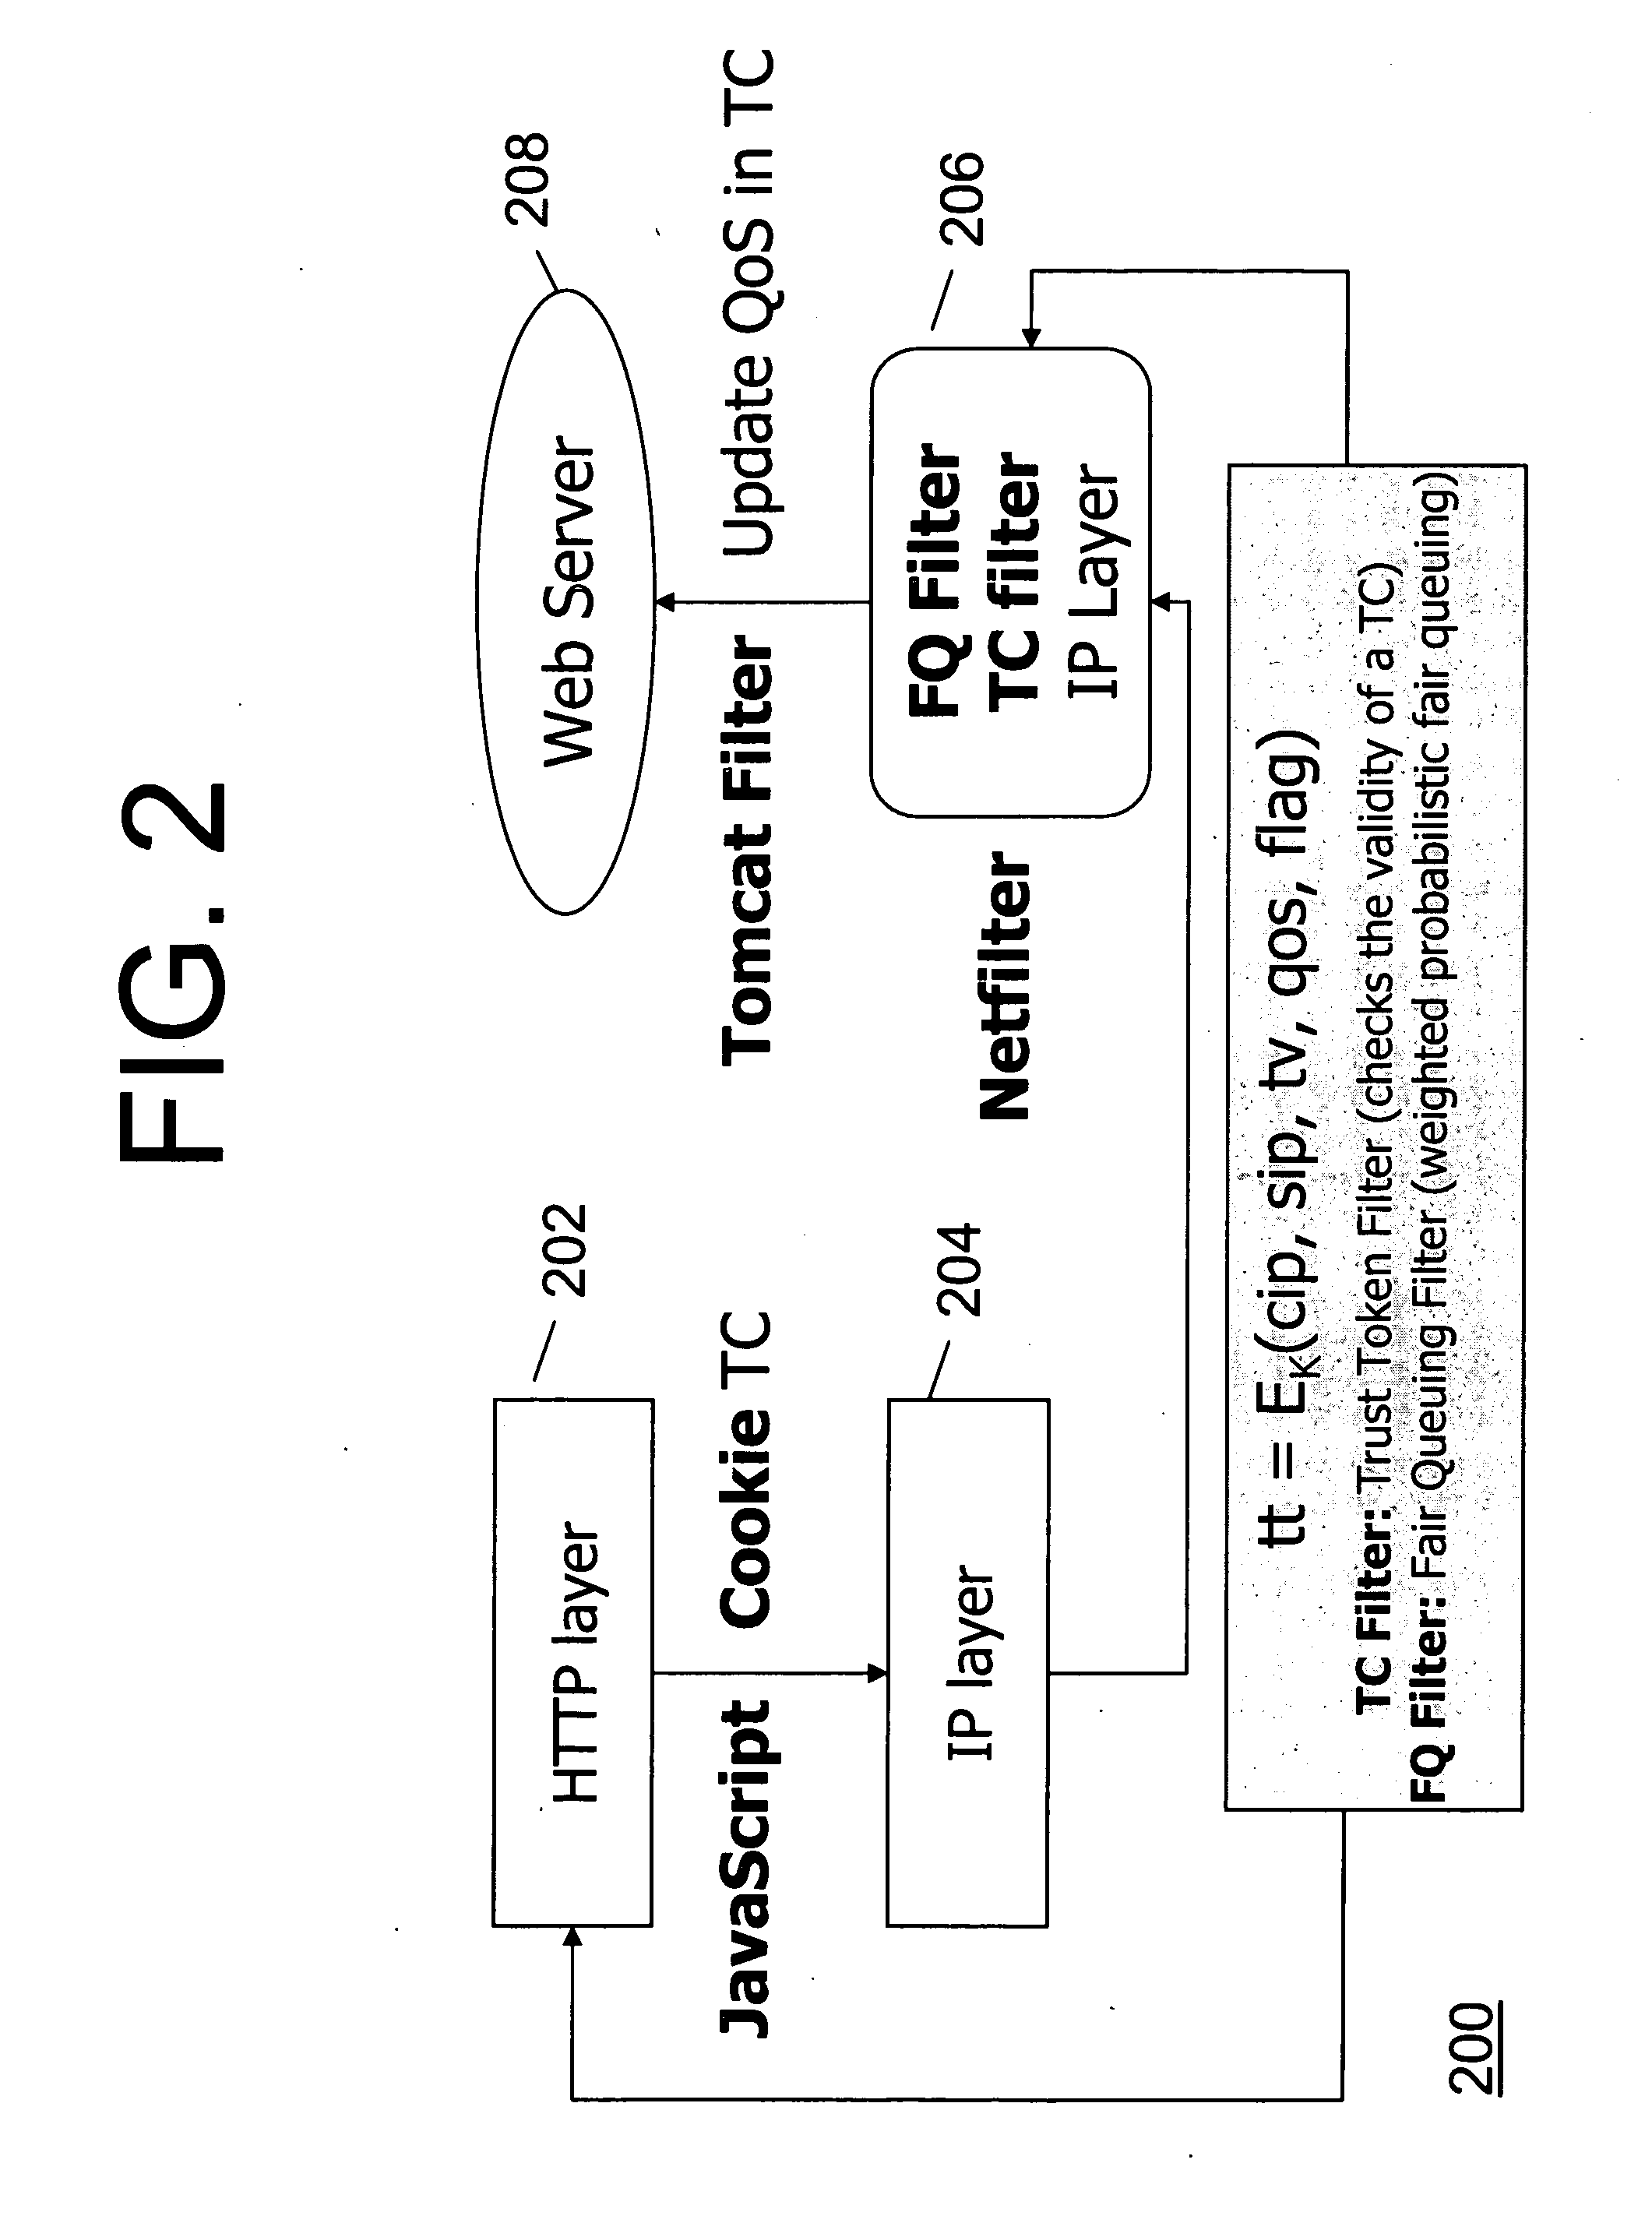 Method and system for protecting against denial of service attacks using trust, quality of service, personalization, and hide port messages